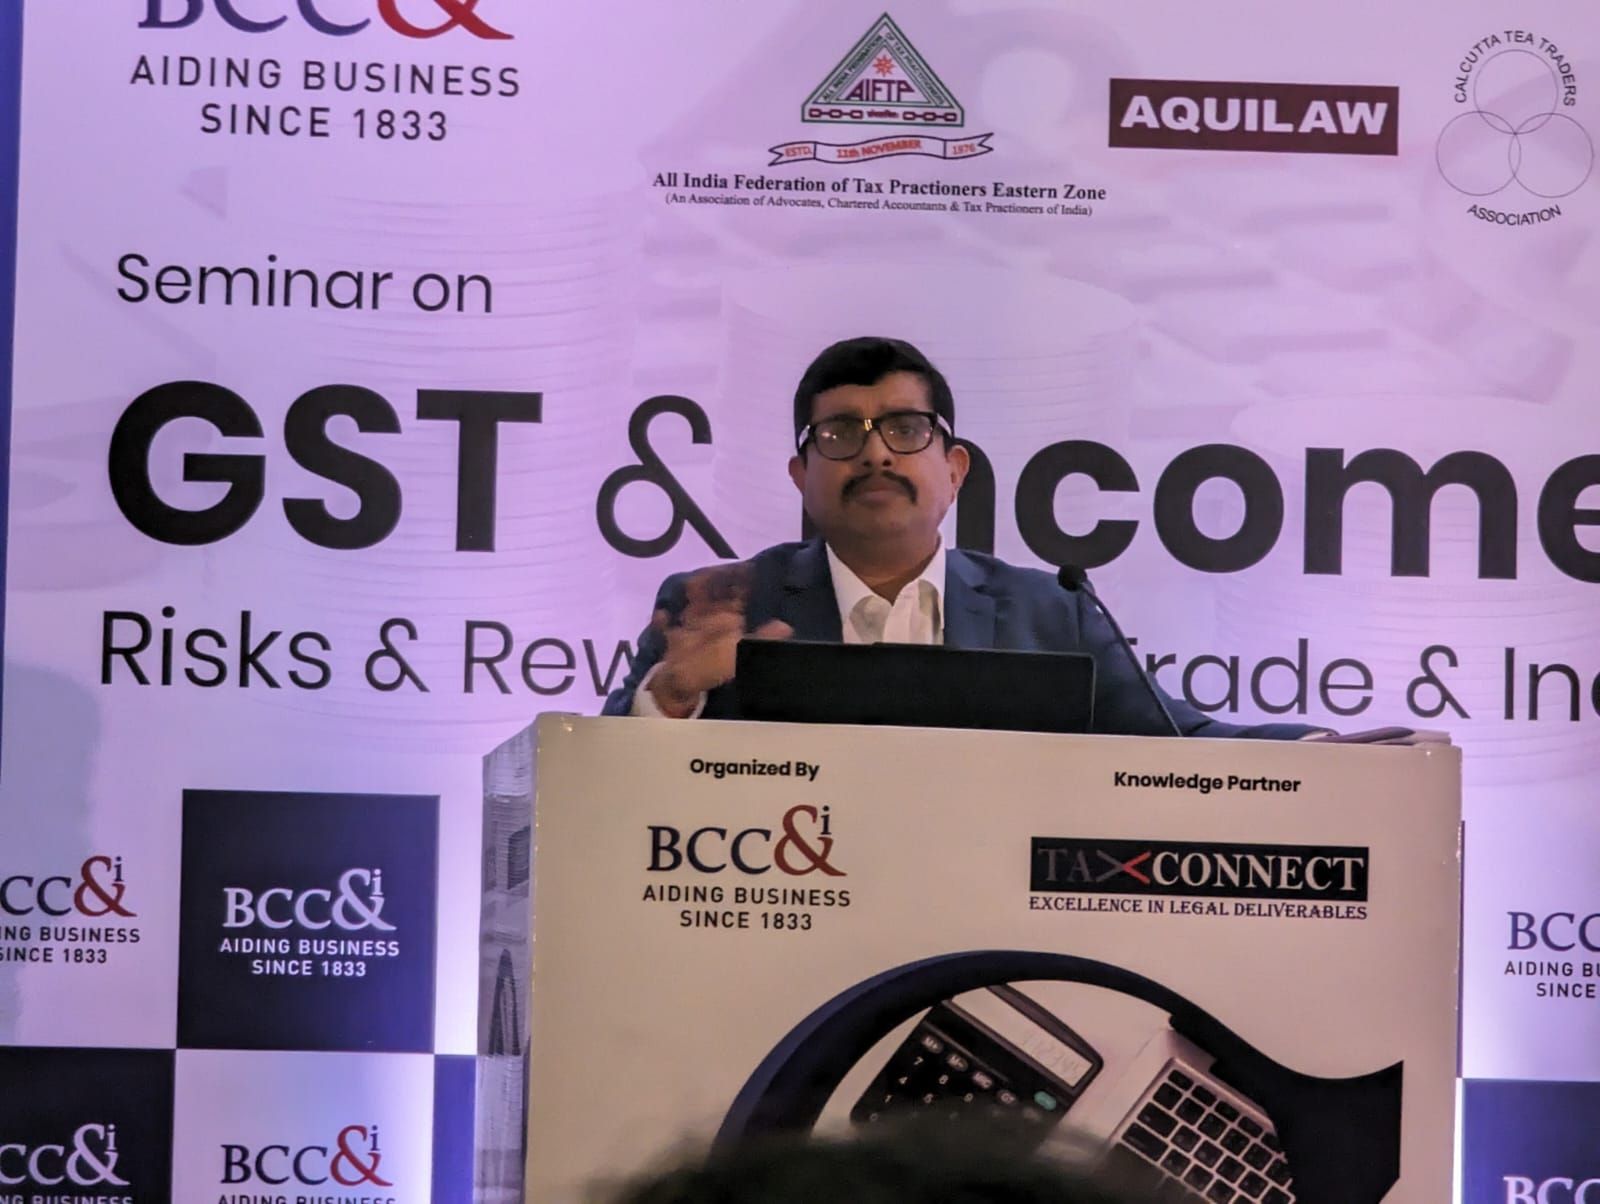 Our Executive Director and Head of Taxes Rajarshi Dasgupta speaking at the Seminar organised by BCC&I on GST & Income Tax.